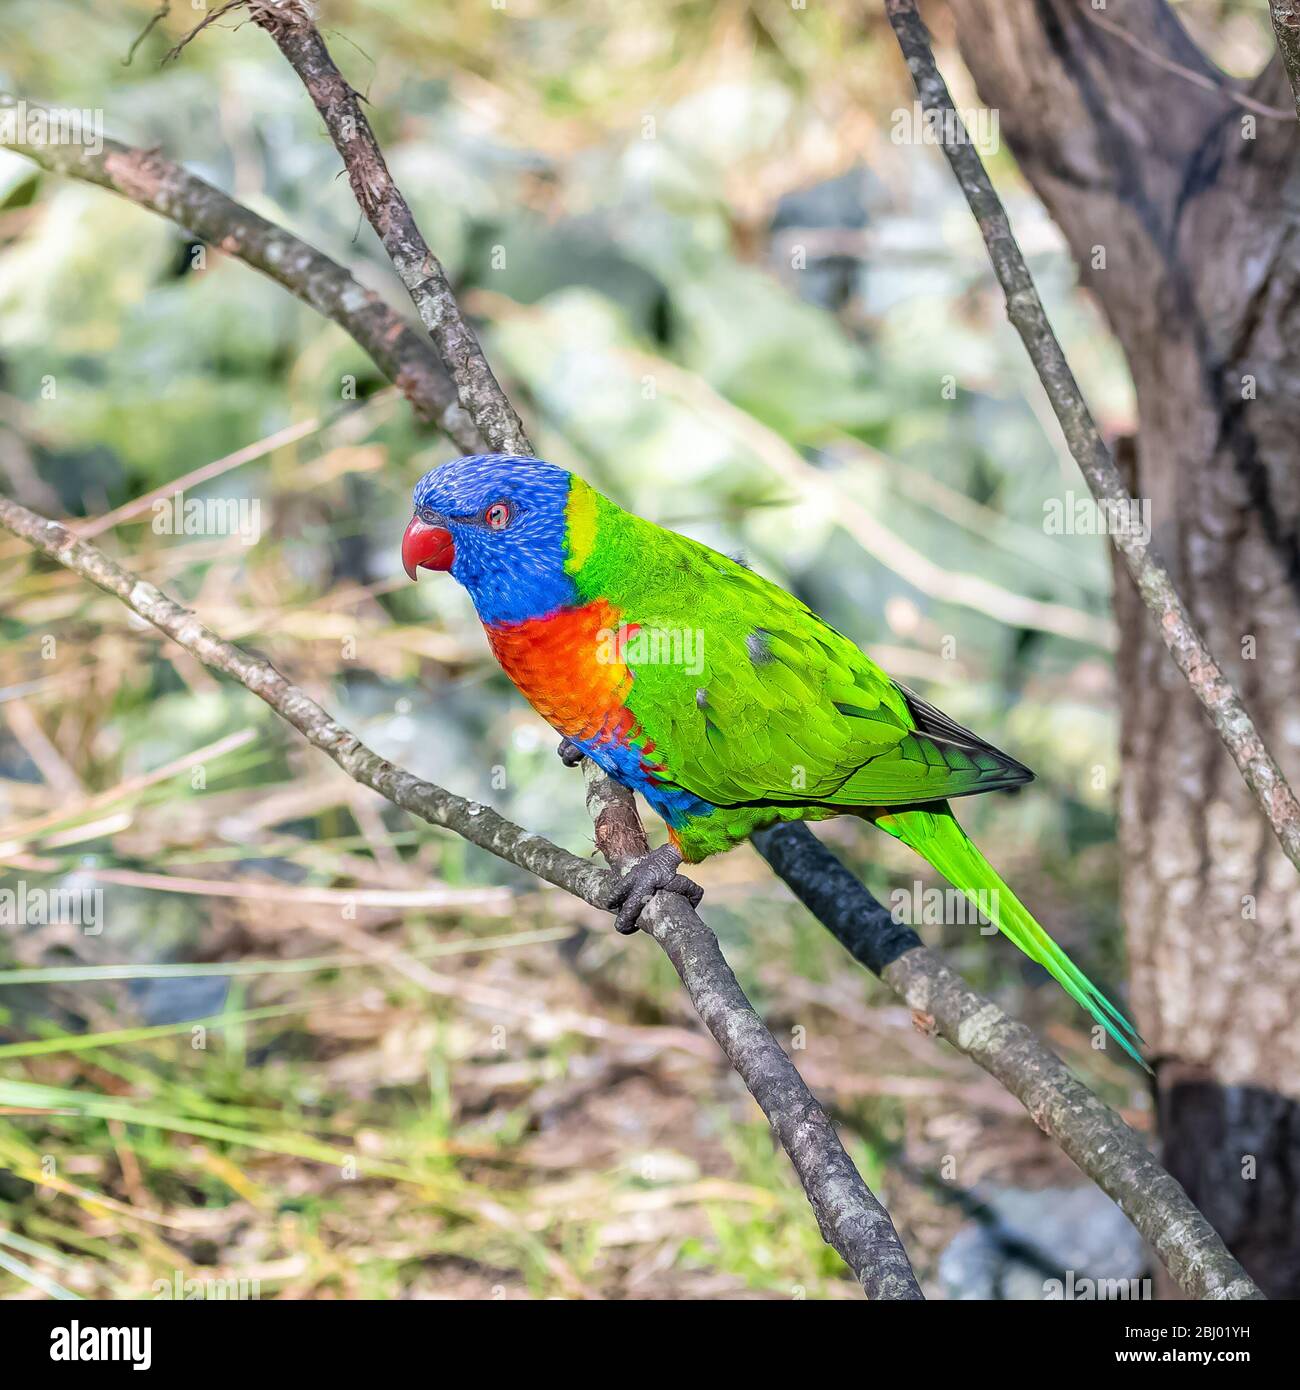 Coconut lorikeet, colorful bird perched on a branch Stock Photo